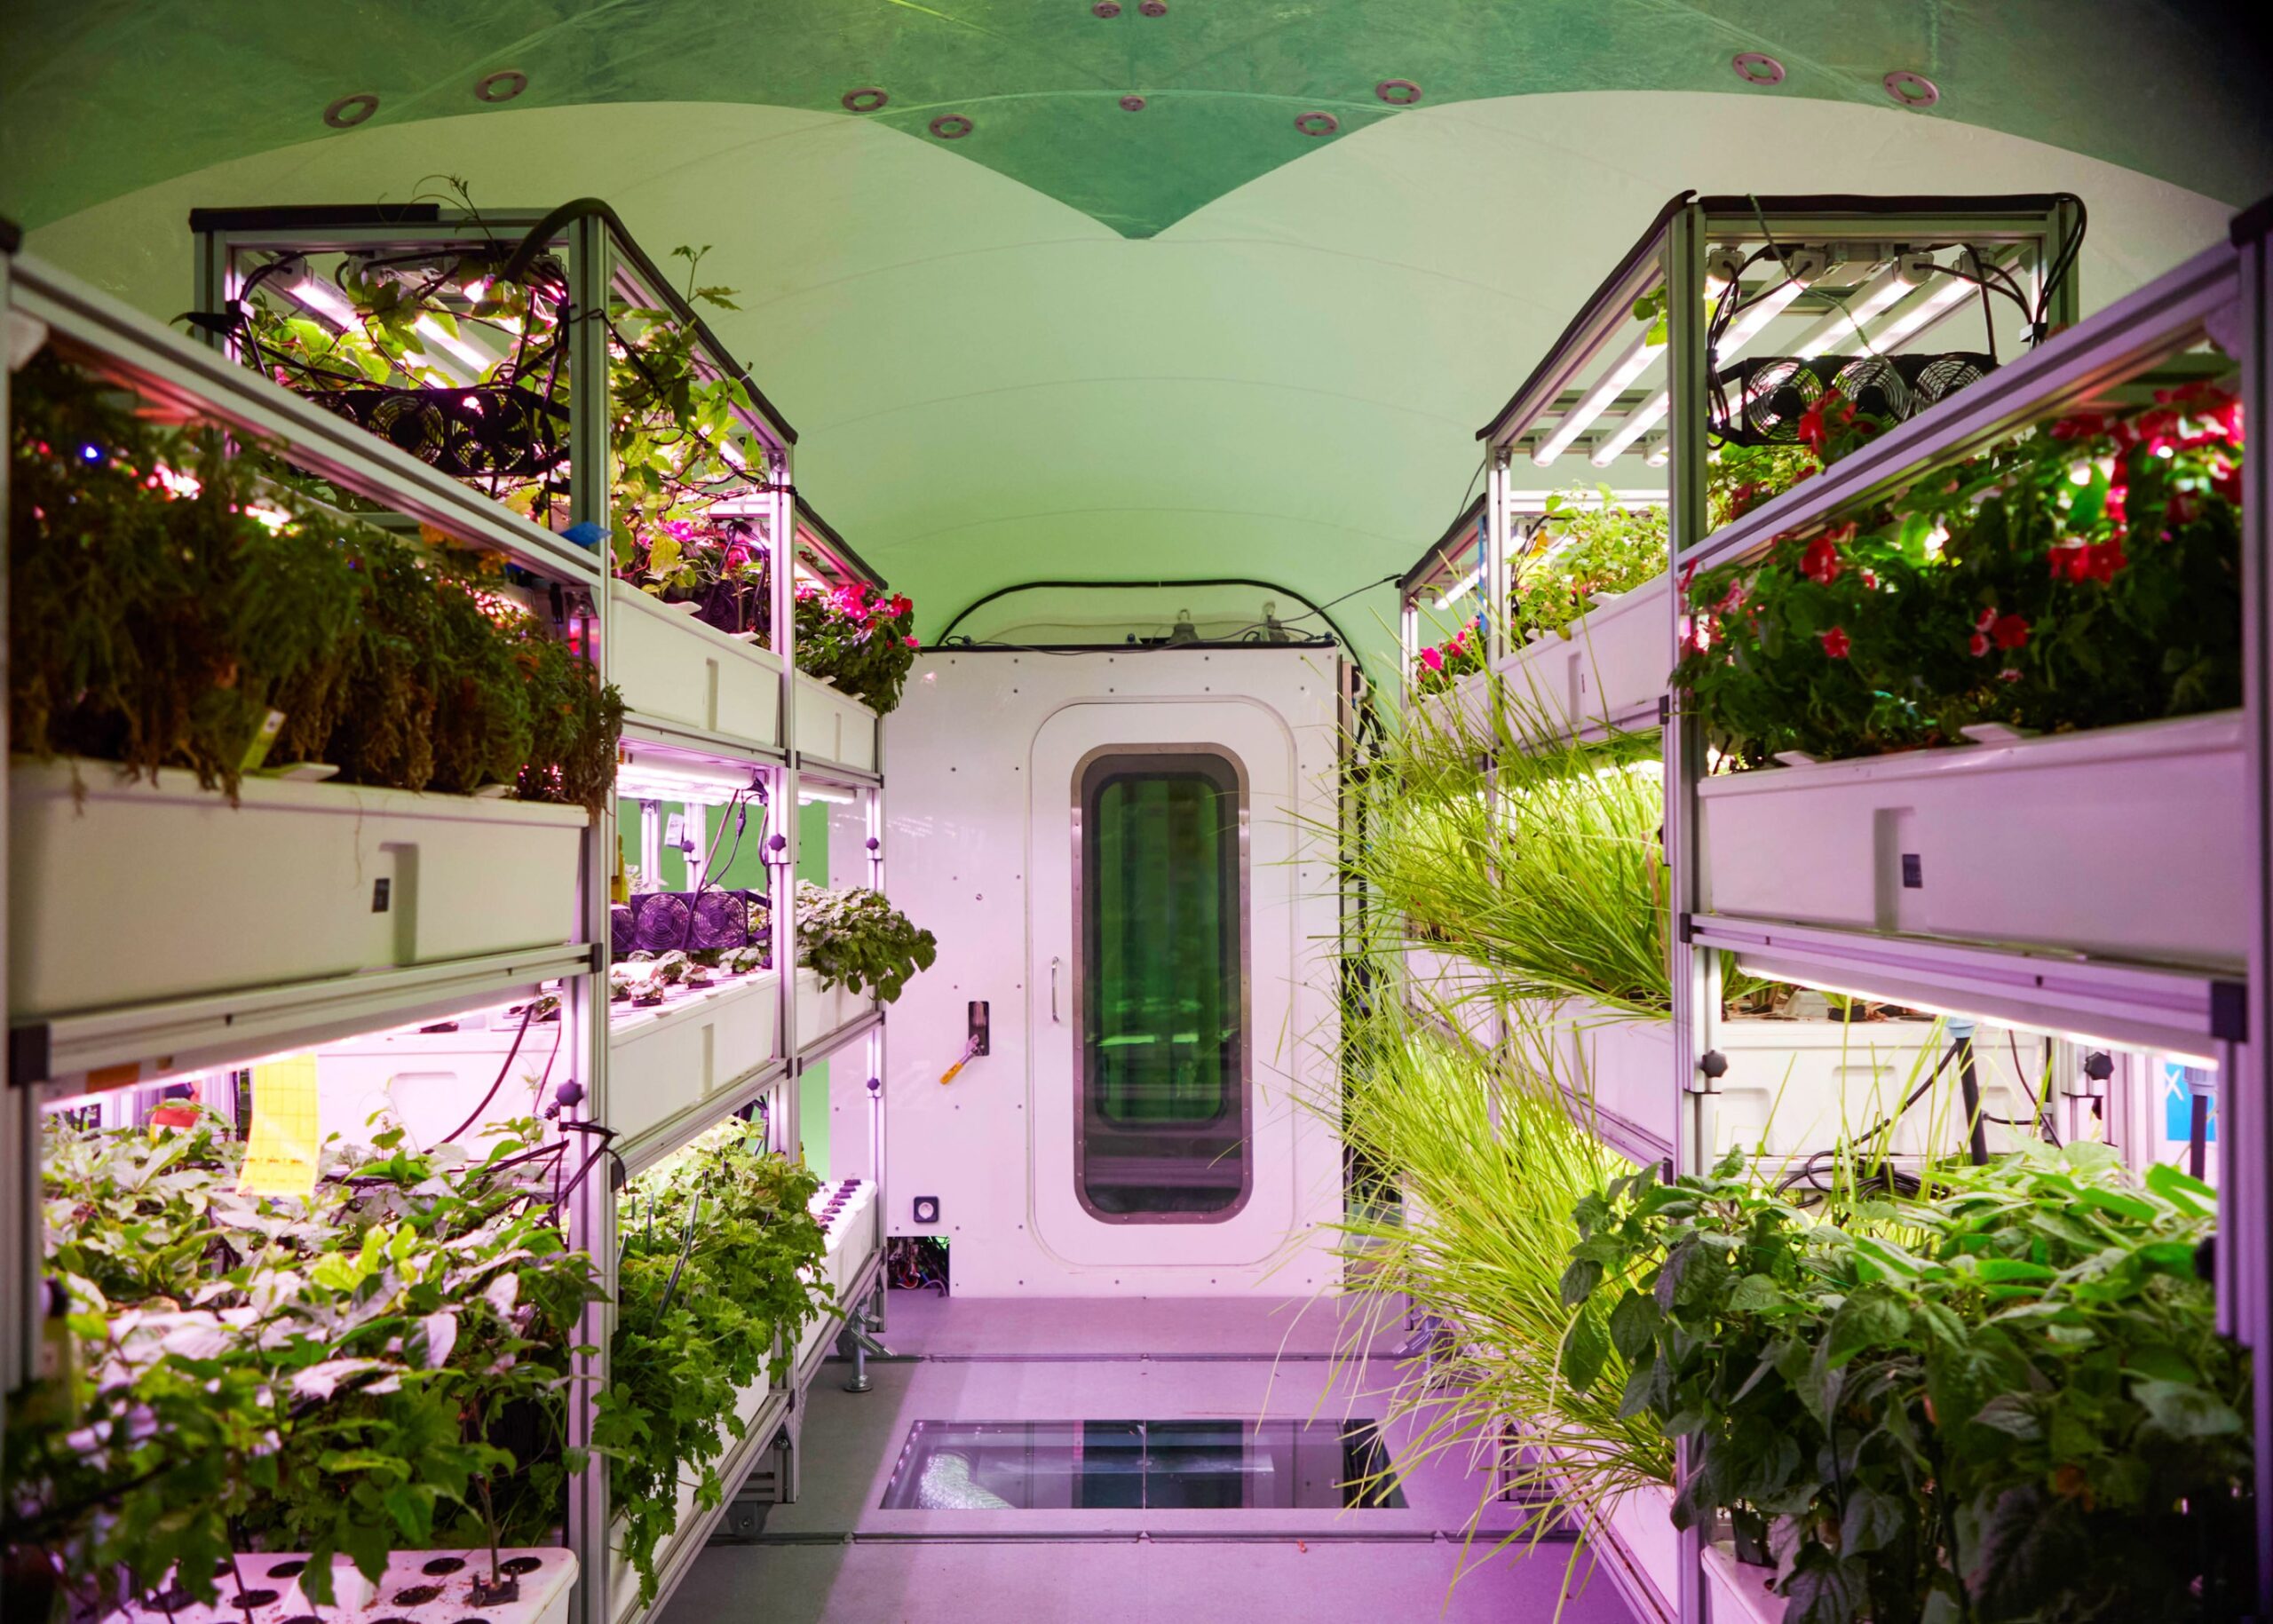 the interior of the BioPod where rows of green edible plants are lit by artificial grow lamps